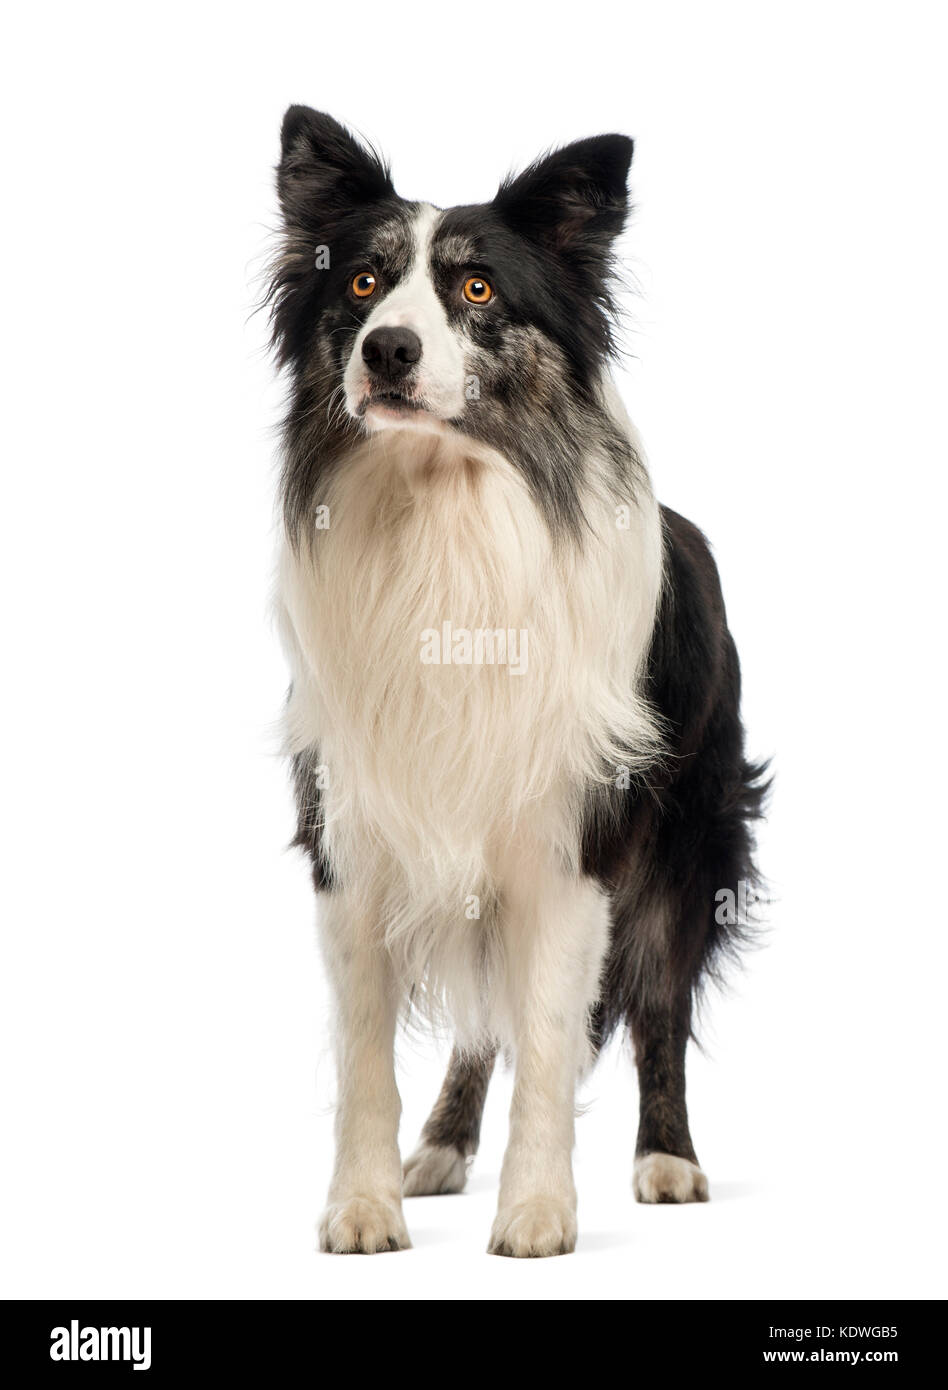 Border Collie, 8.5 years old, looking up in front of white background Stock Photo